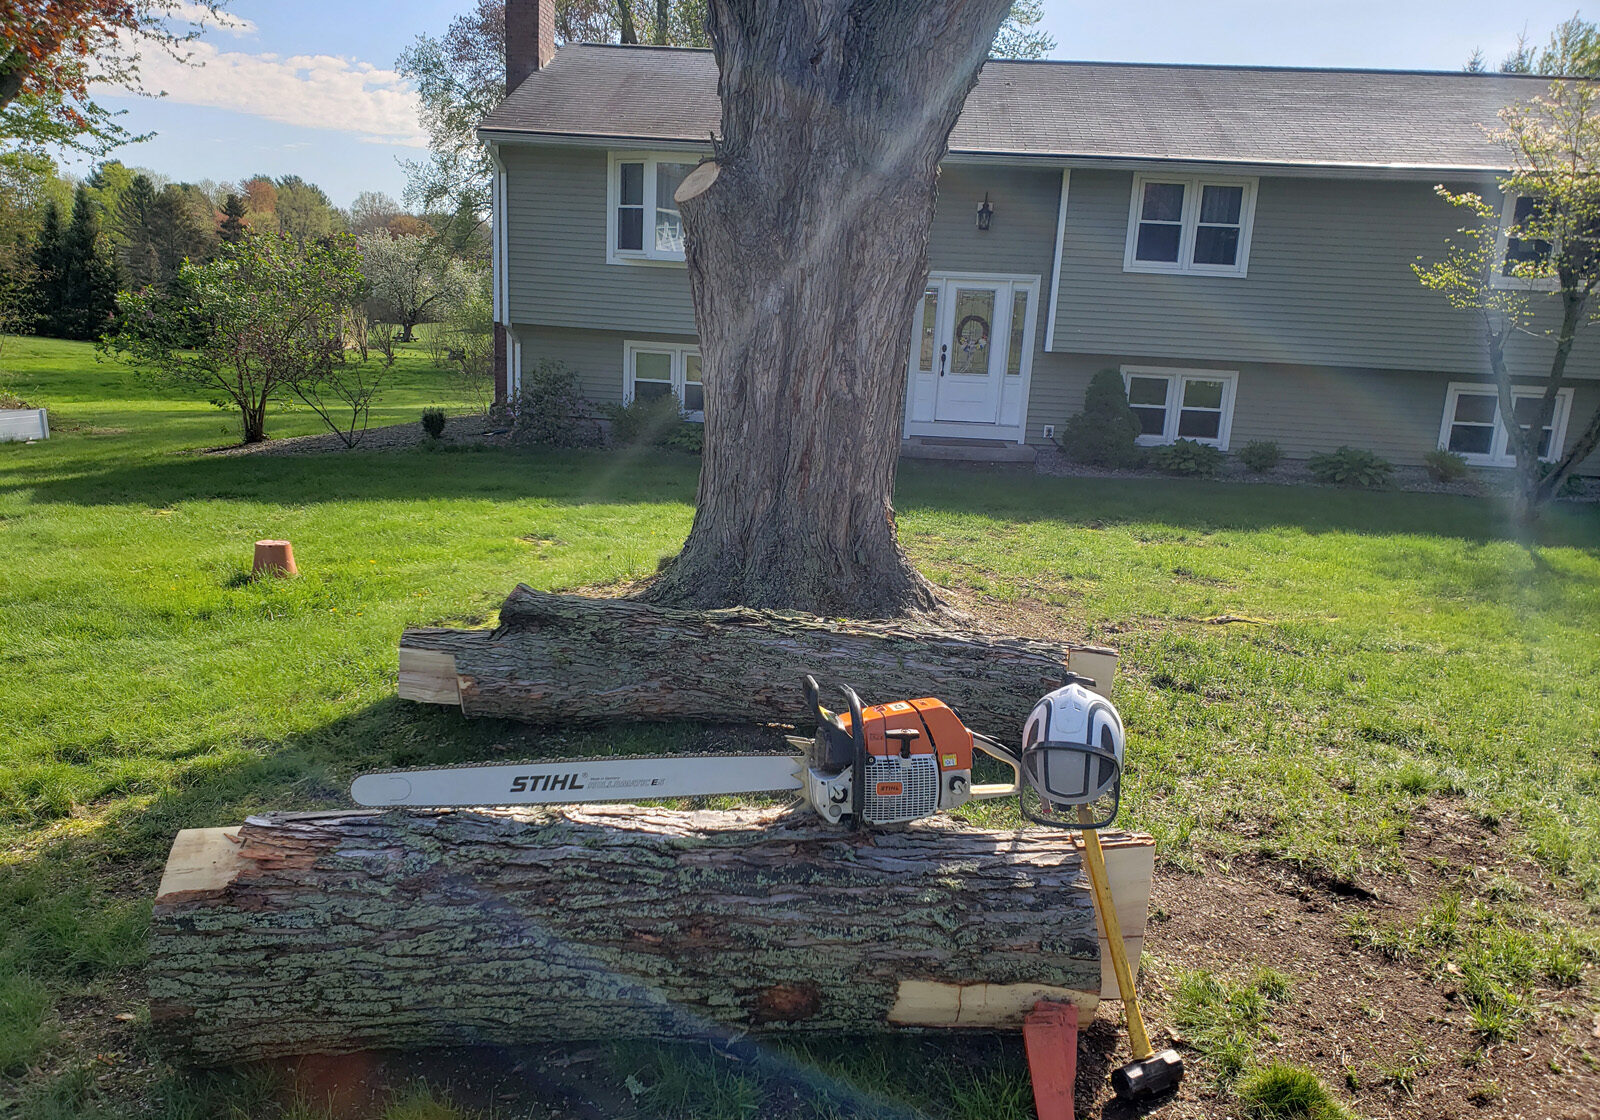 TREE REMOVAL